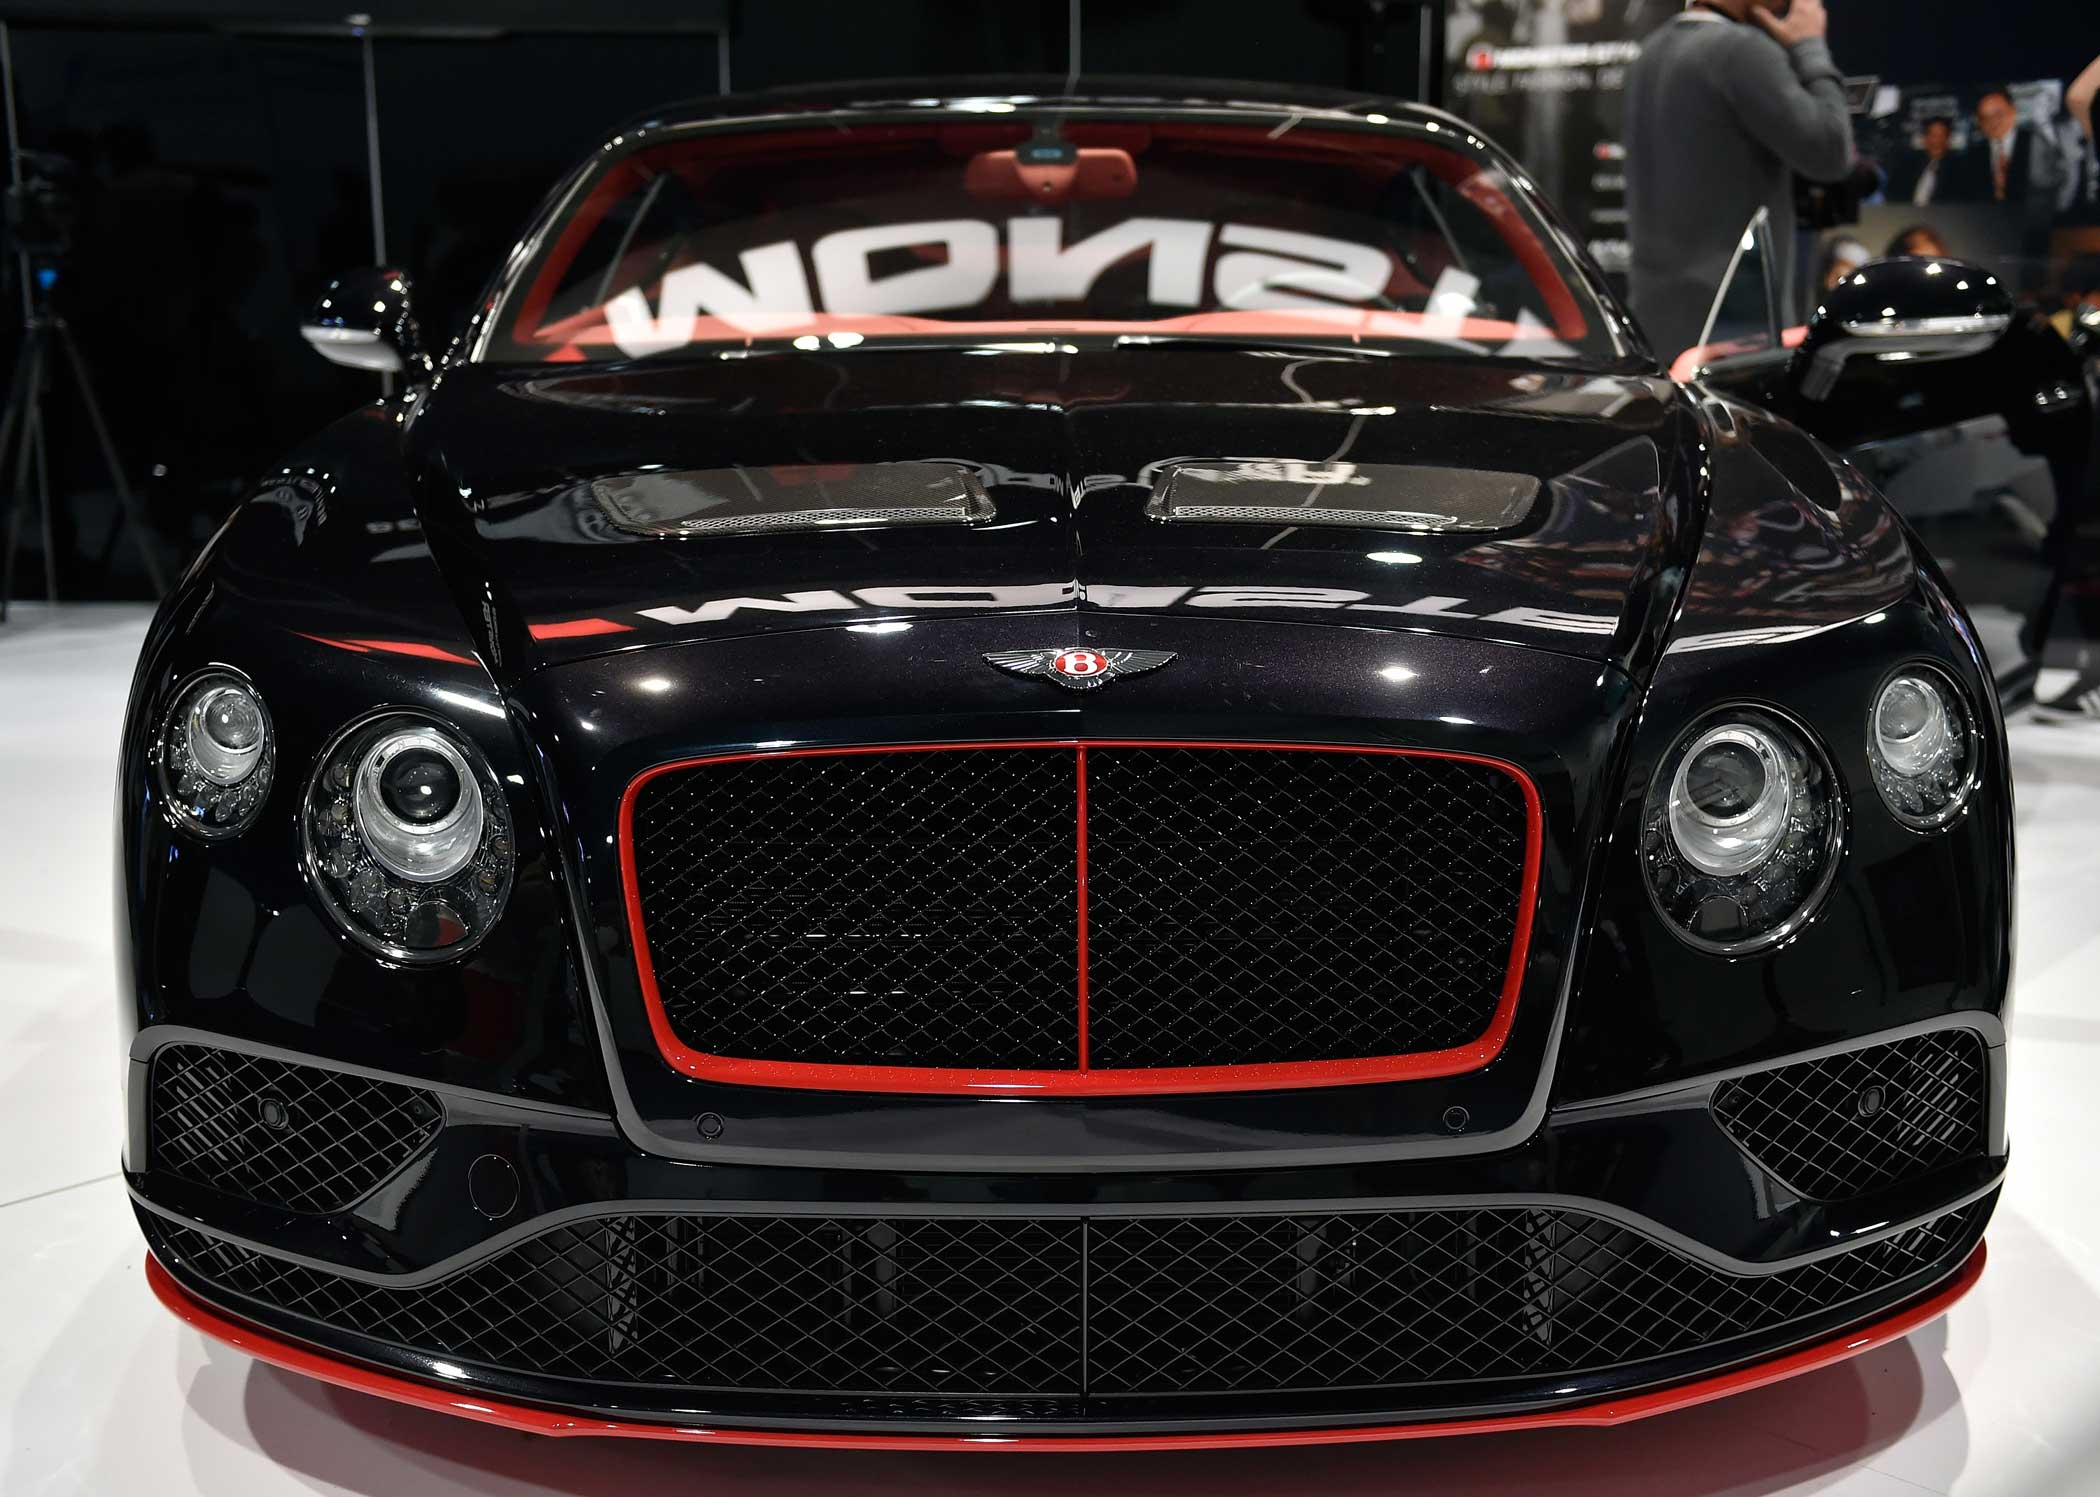 The Bentley Continental GT V8 S is displayed at the Monster booth.